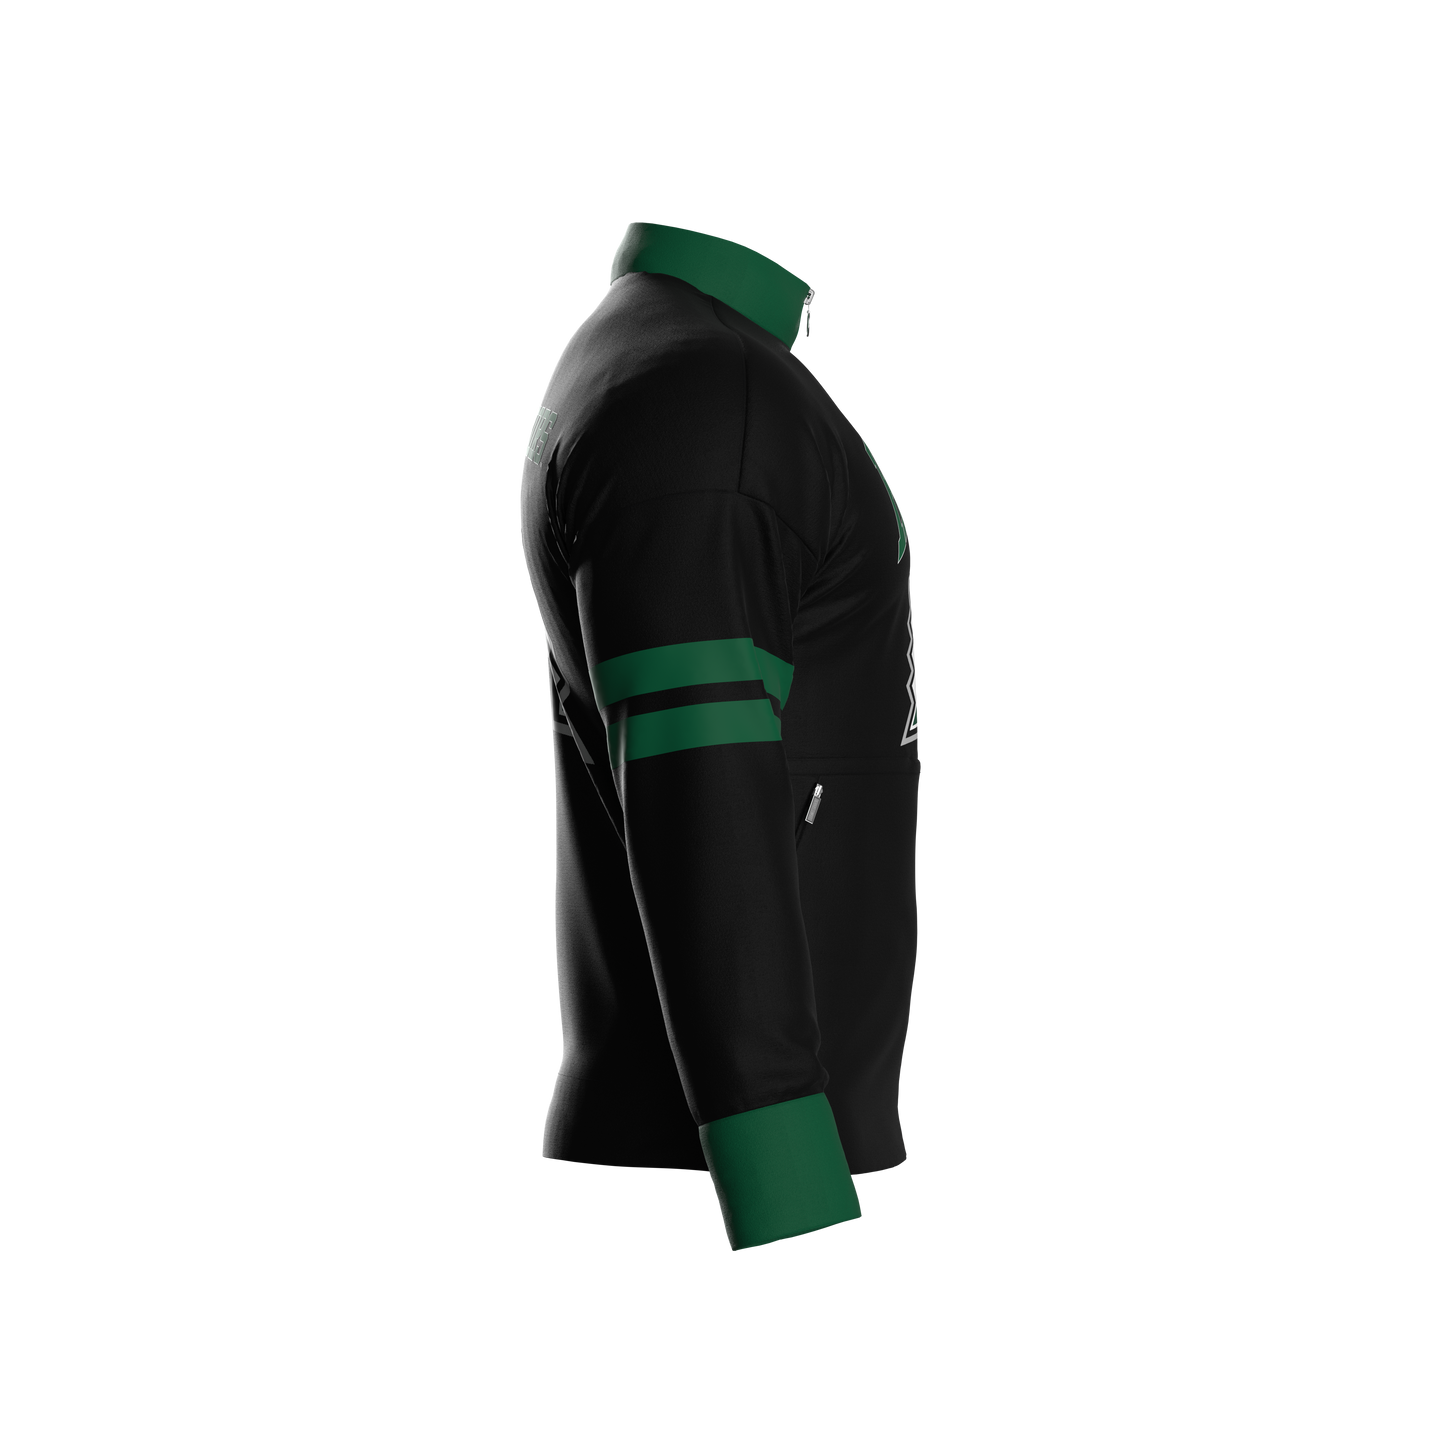 University of Hawaii Home Zip-Up (youth)